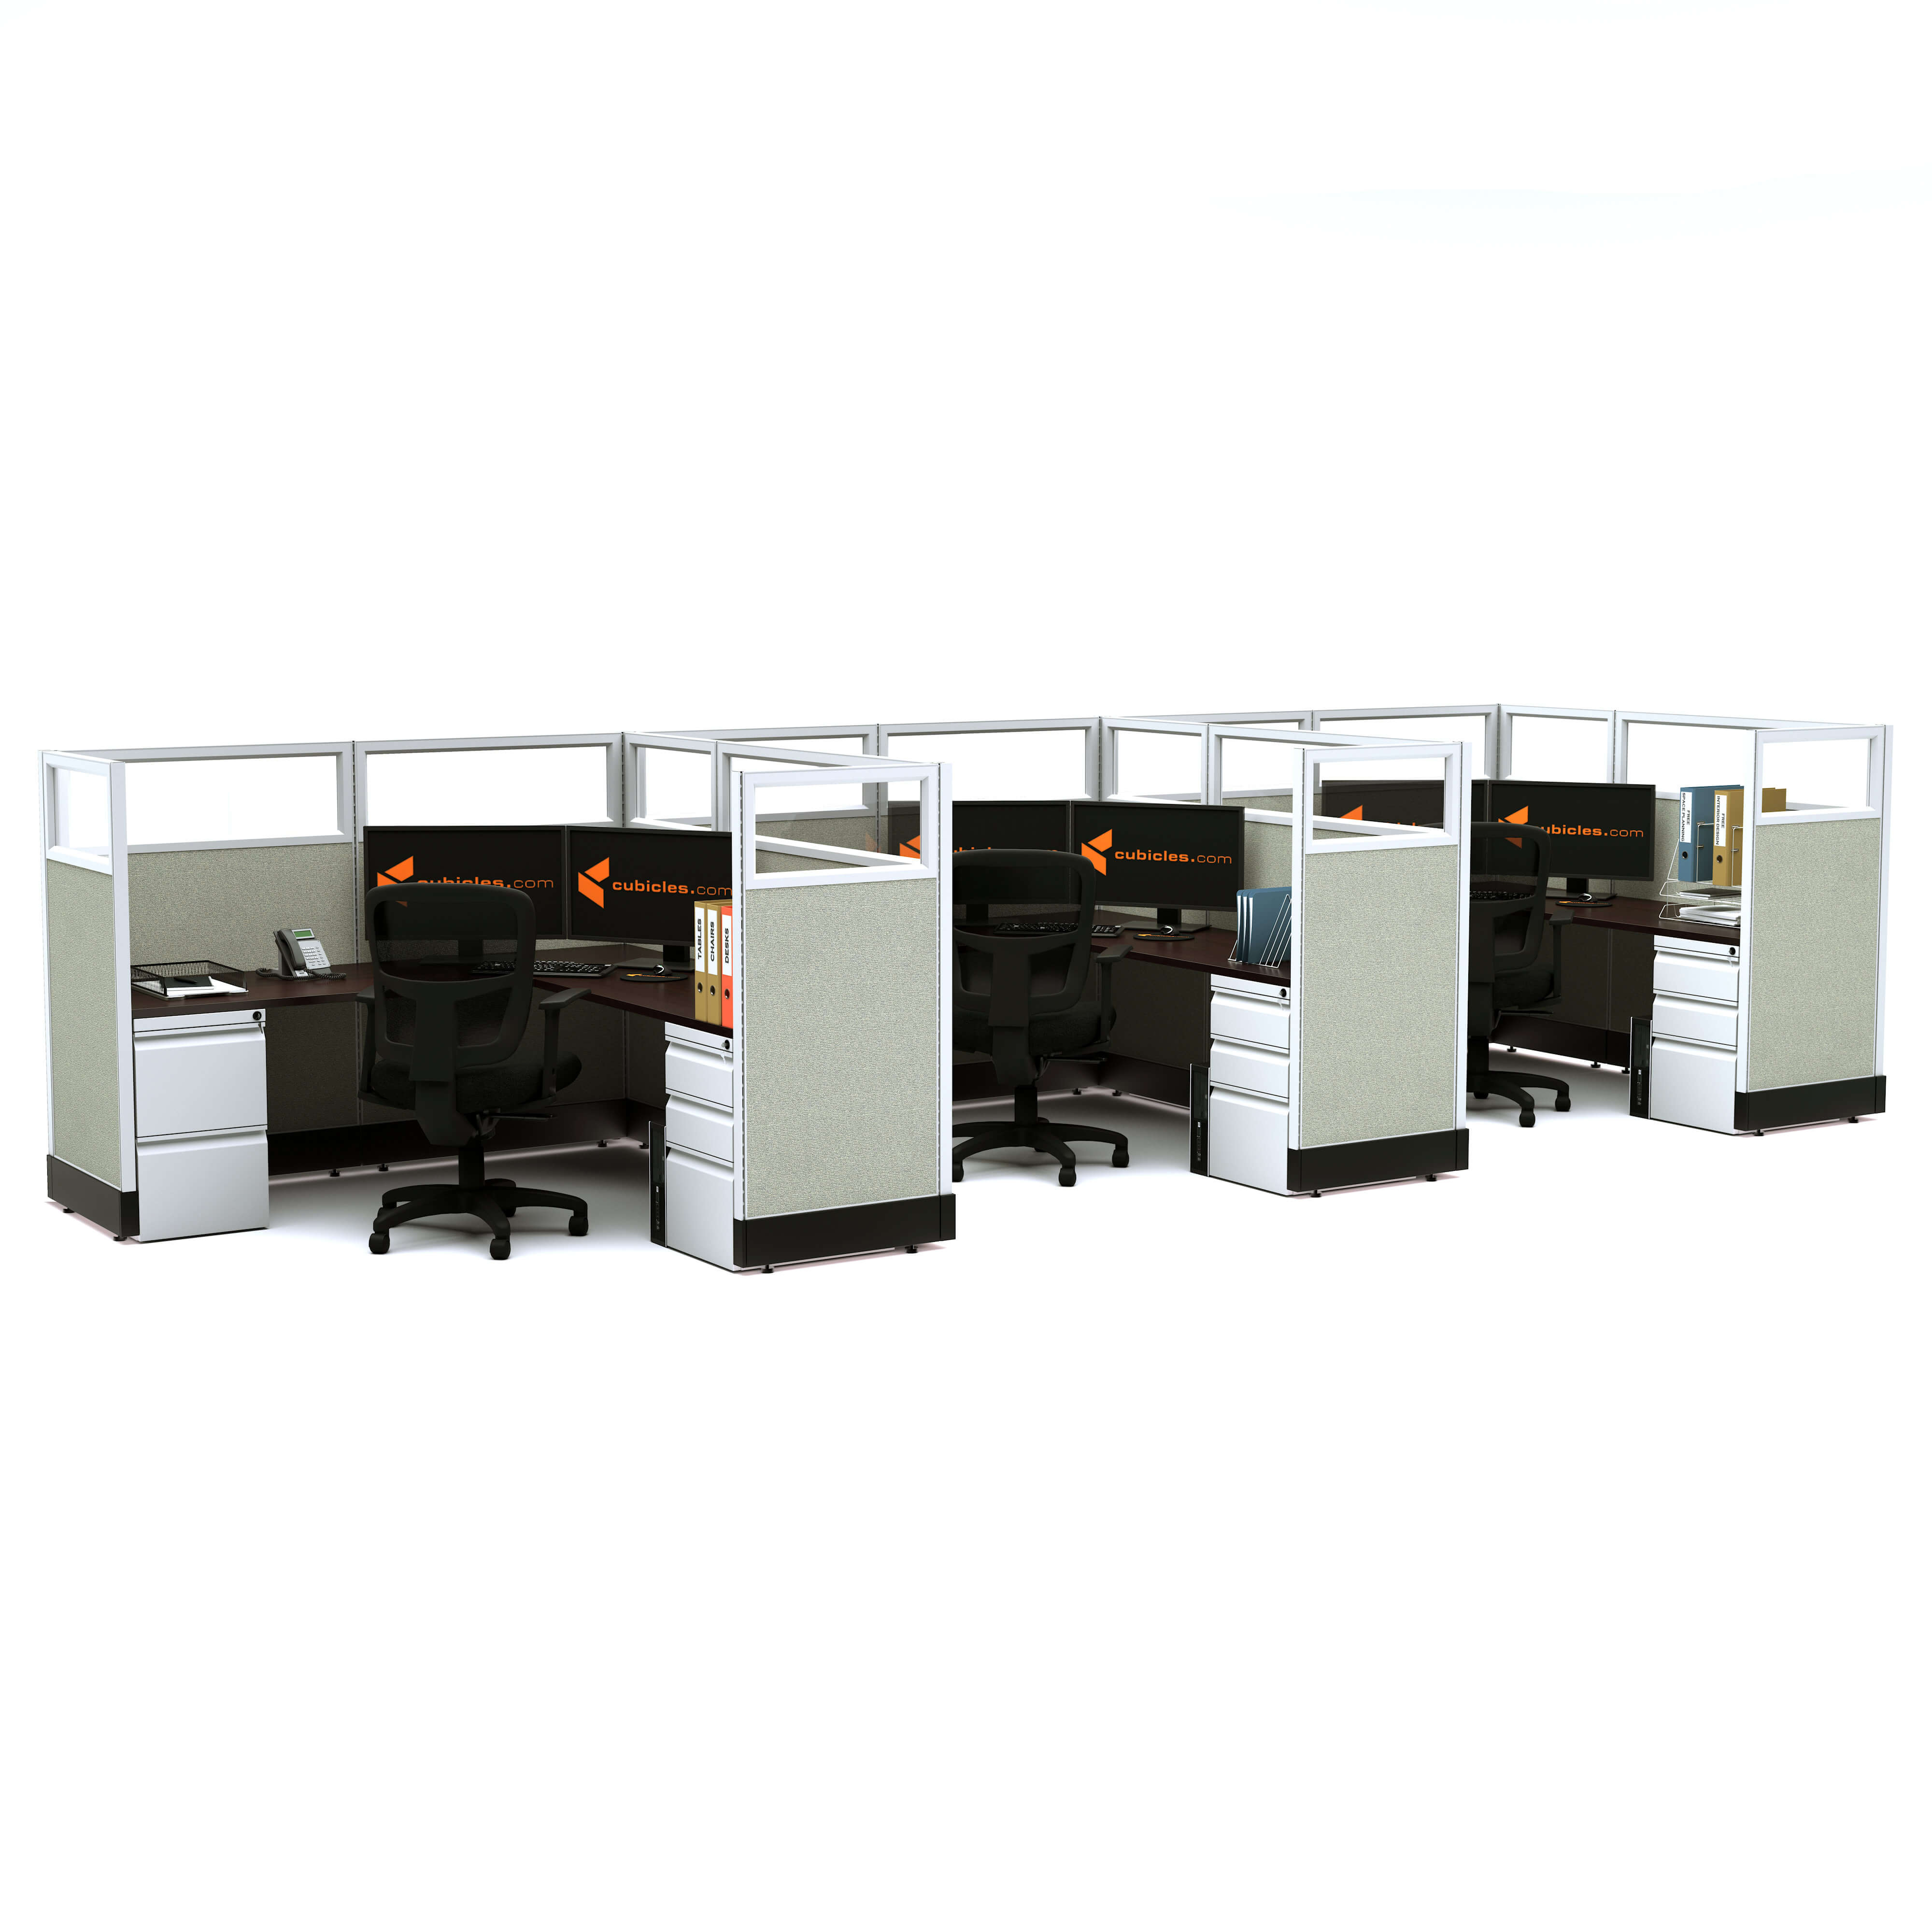 modular-office-furniture-glass-office-cubicles-53h-3pack-inline-powered-1.jpg